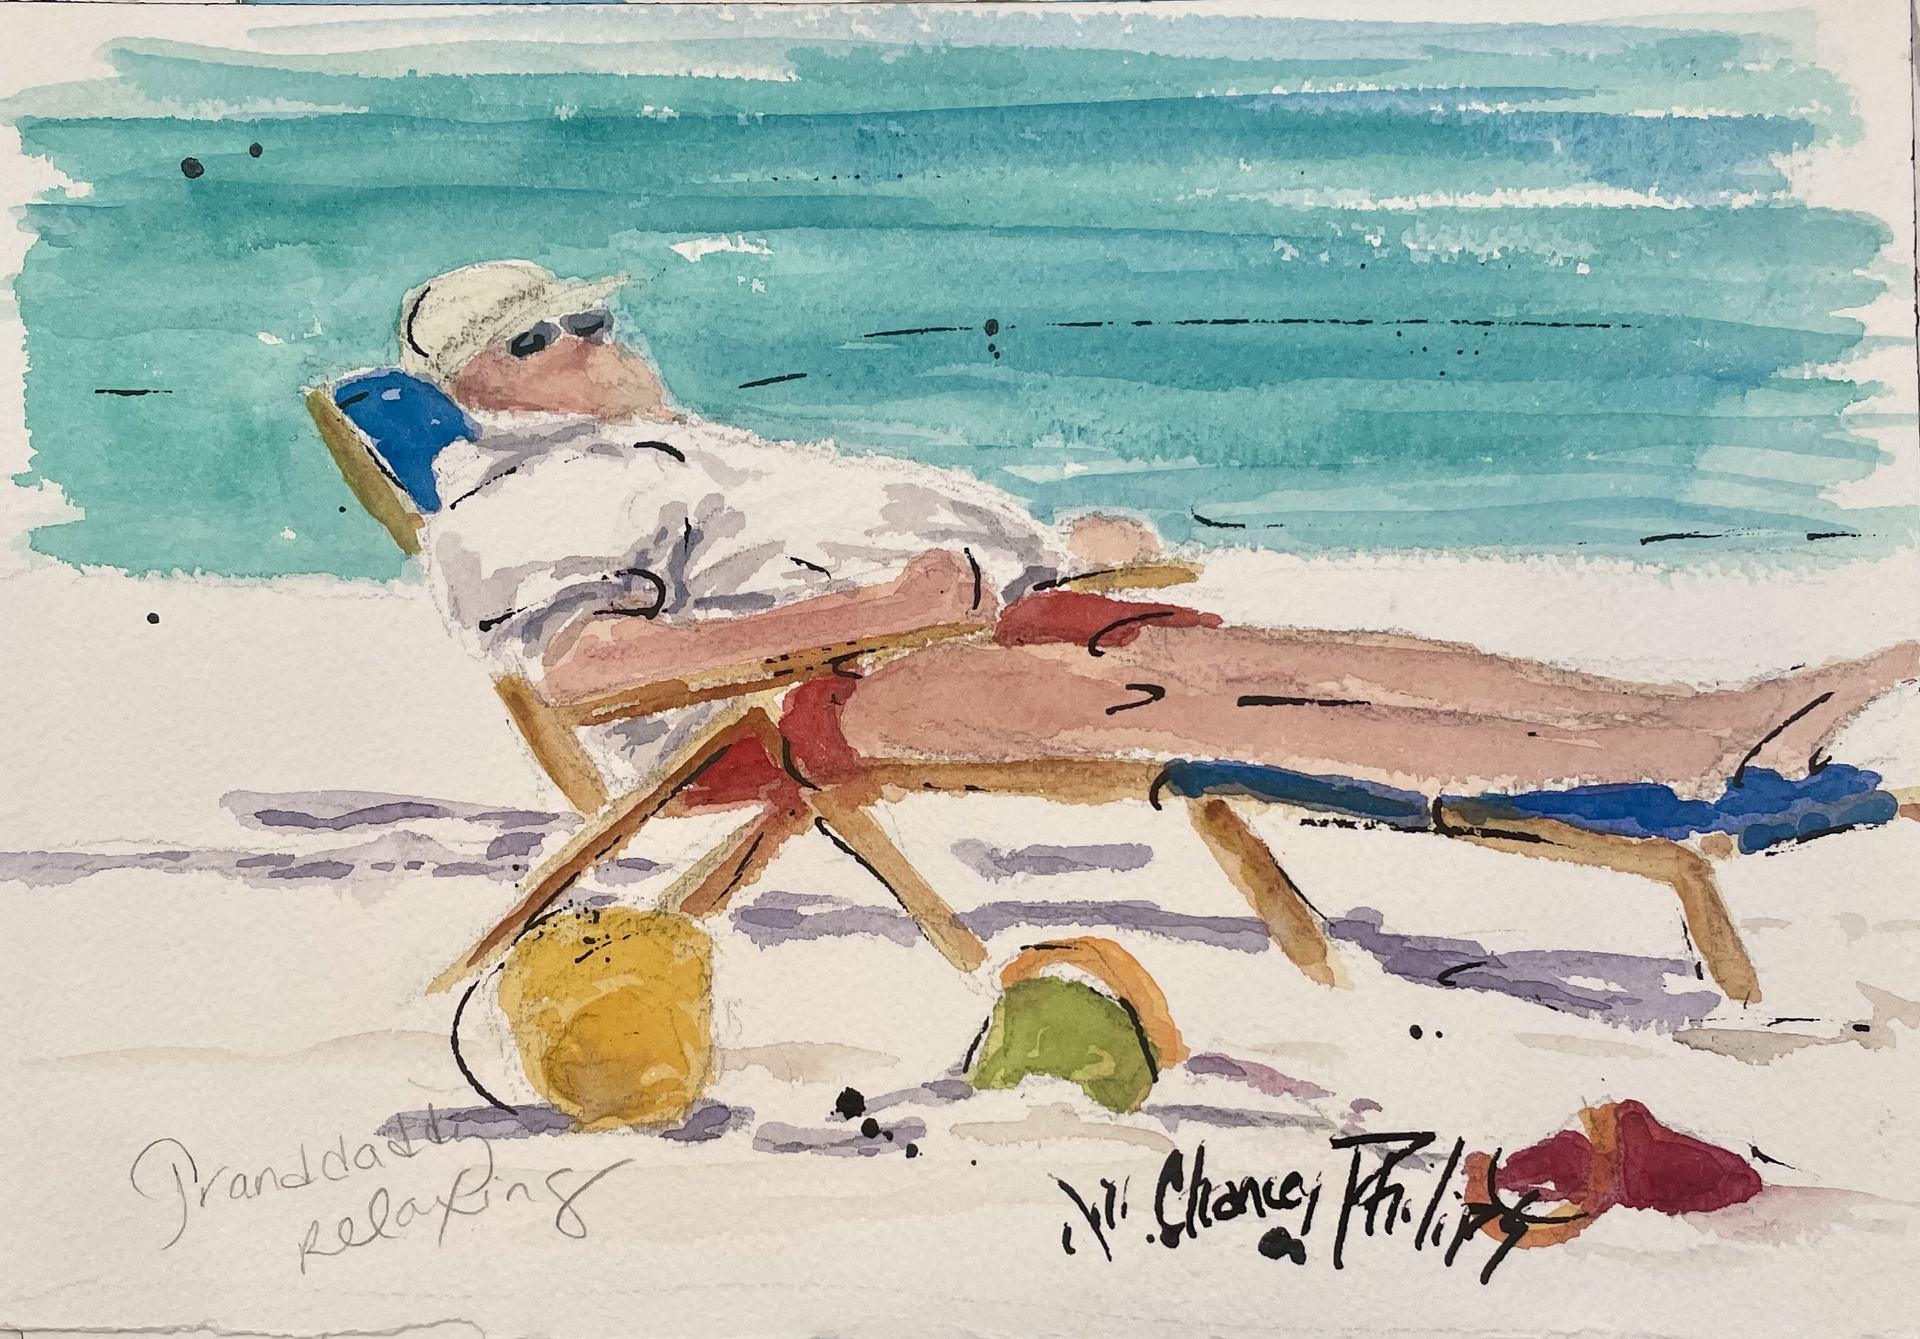 351 Granddaddy Relaxing by Jill Chancey Philips